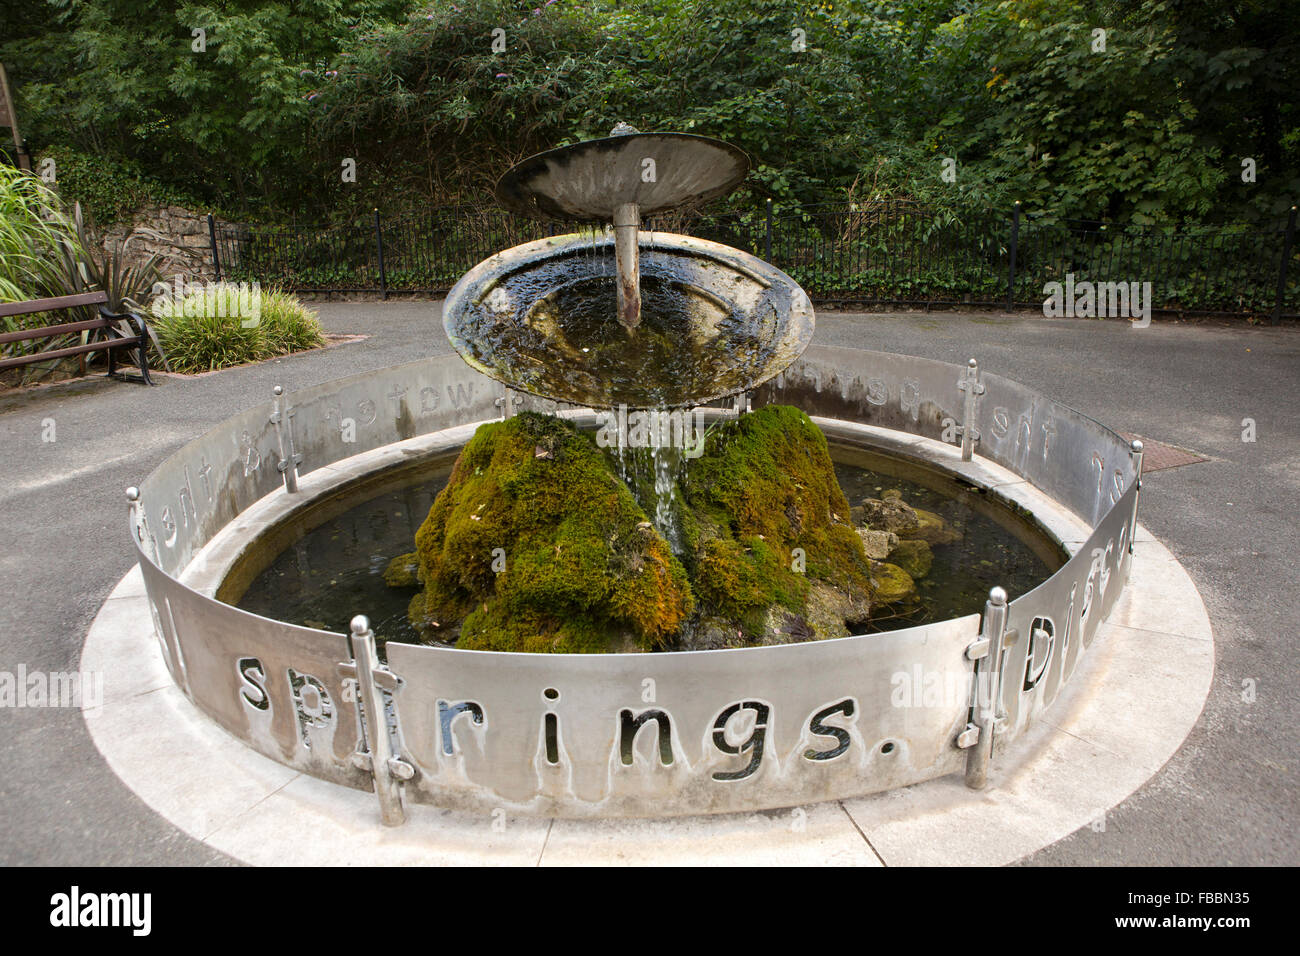 UK, England, Derbyshire, Matlock Bath, South Parade, mossy flowing water sculpture Stock Photo